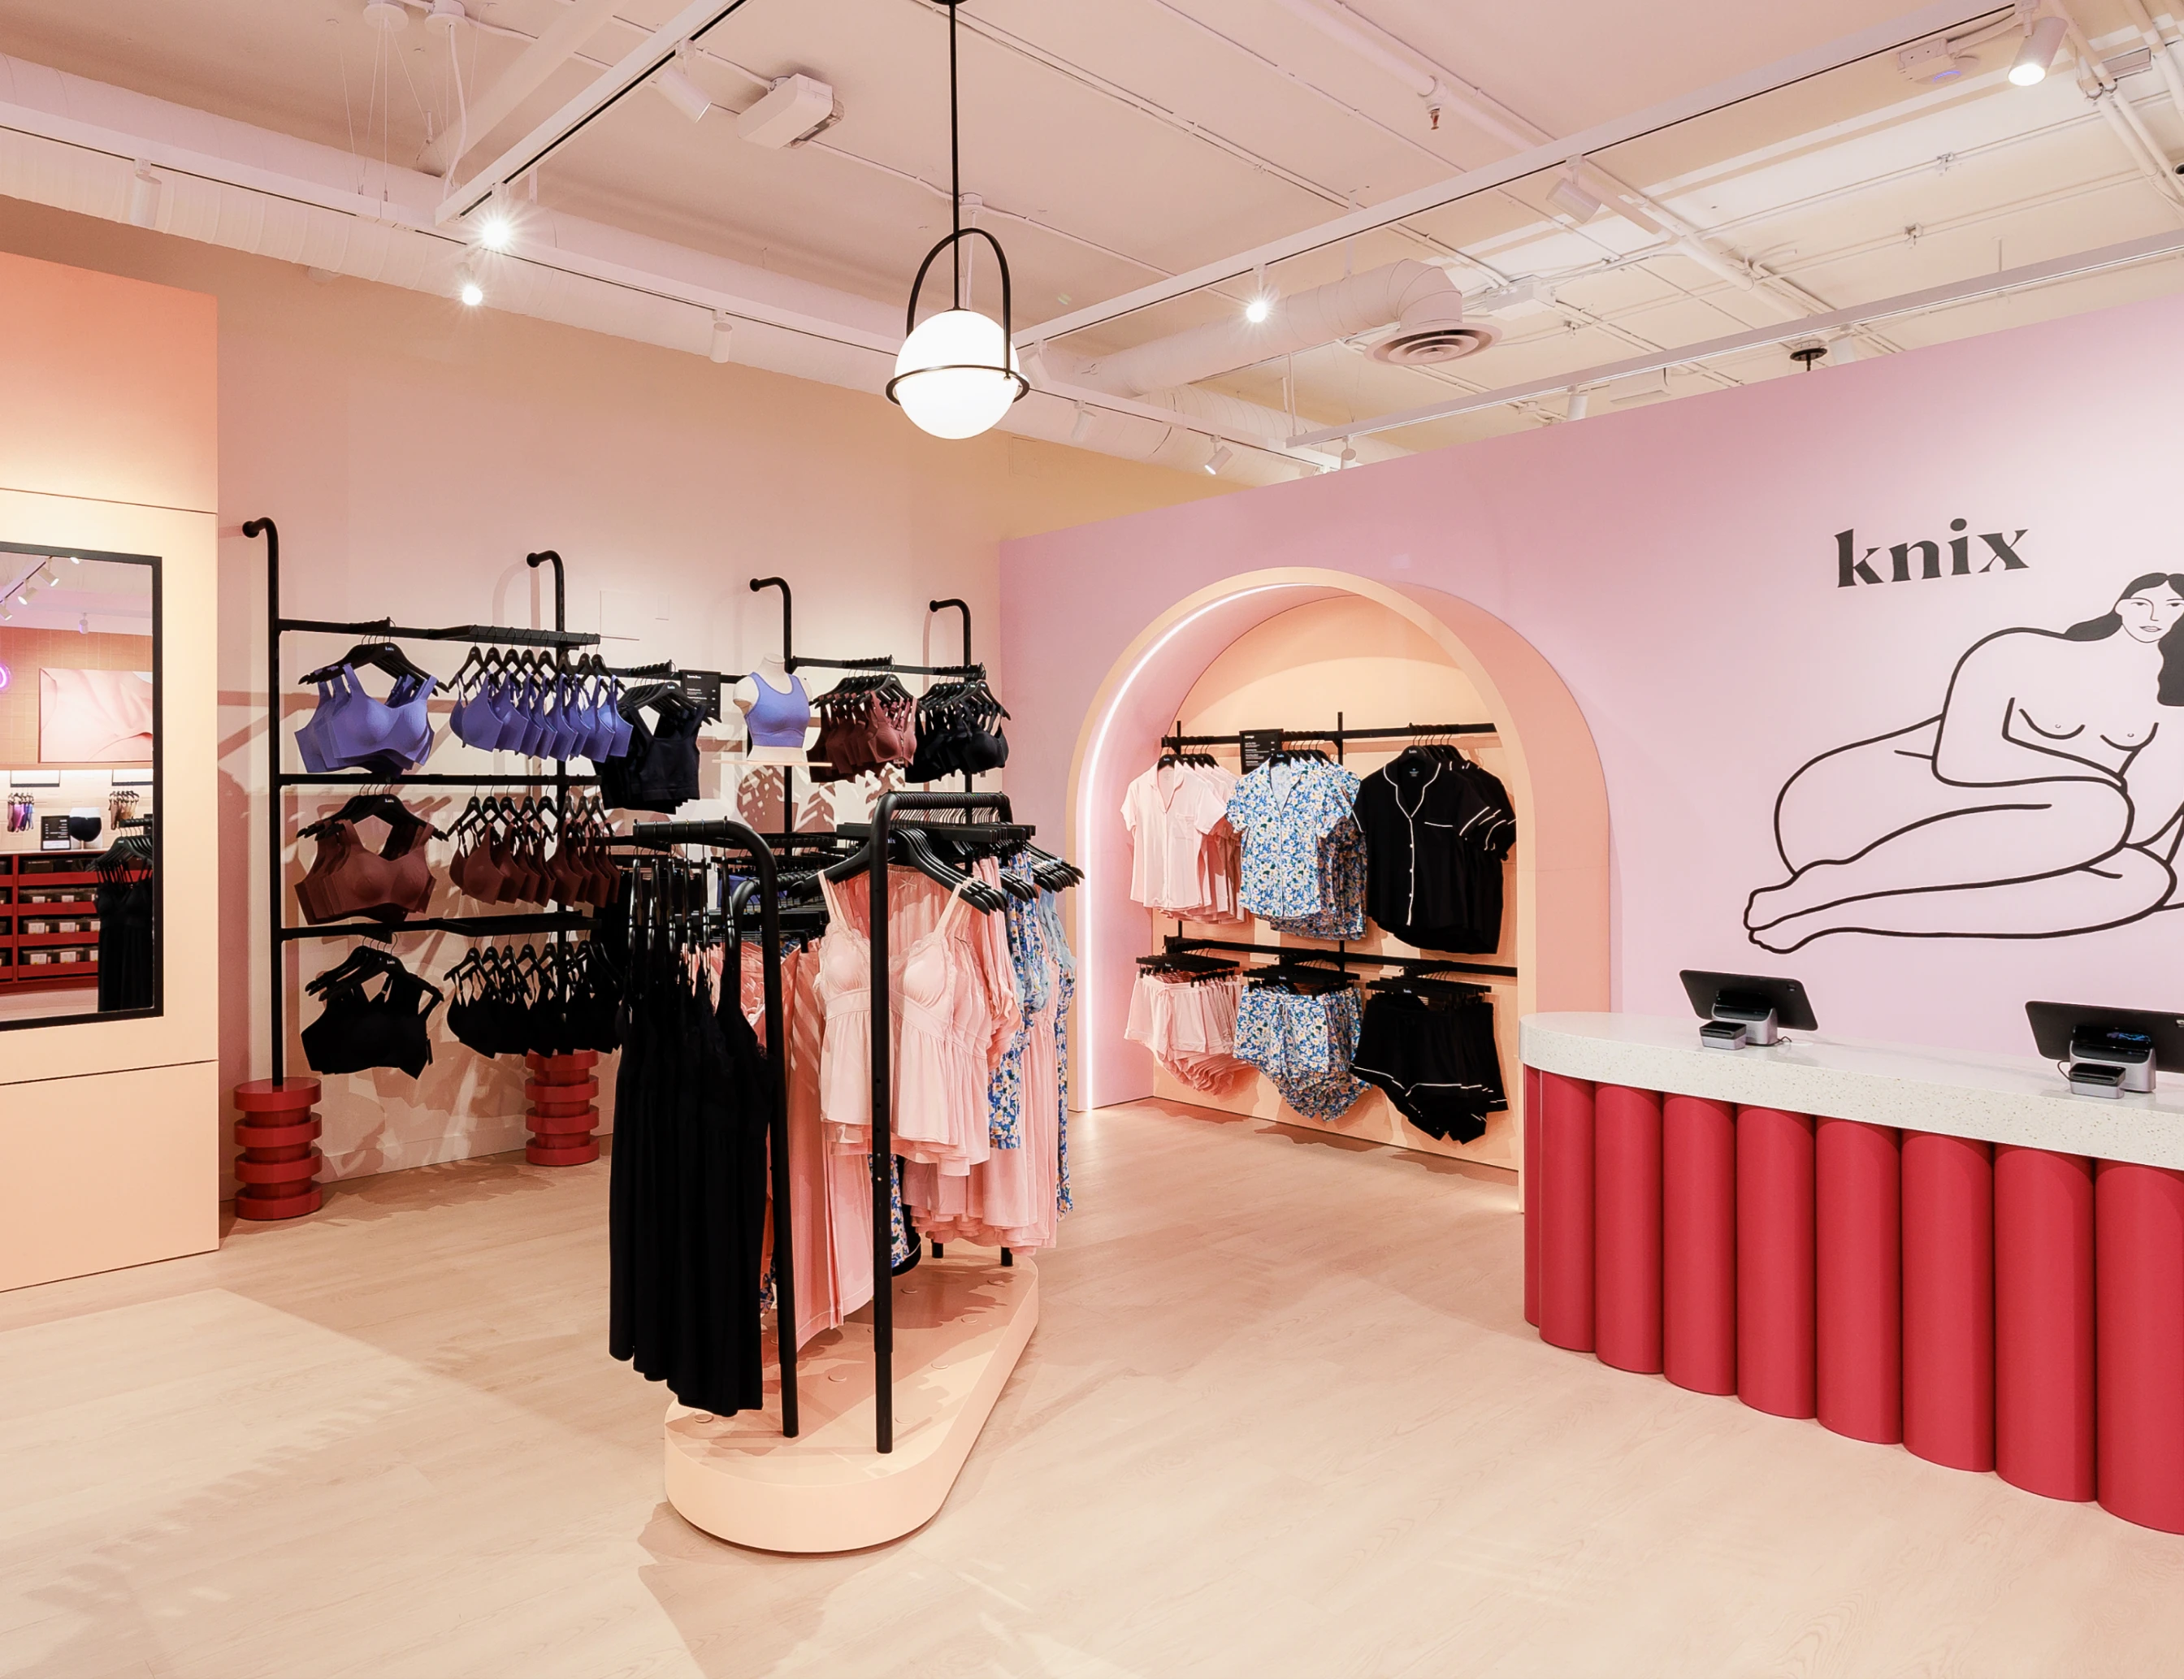 Knix to Open 6 New Stores in Canada Amidst Rapid Expansion